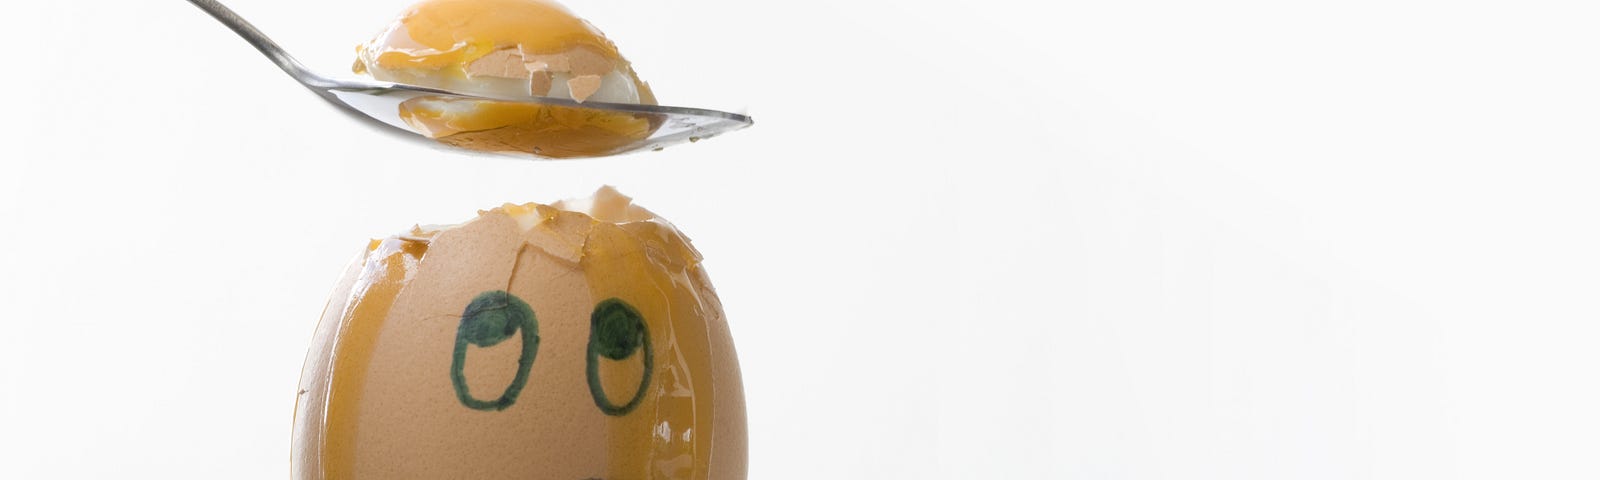 White background. Egg in egg cup. Egg with sad face drawn on it looking up. Egg is streaming with yoke from where a spoon above it has dug out the yoke.